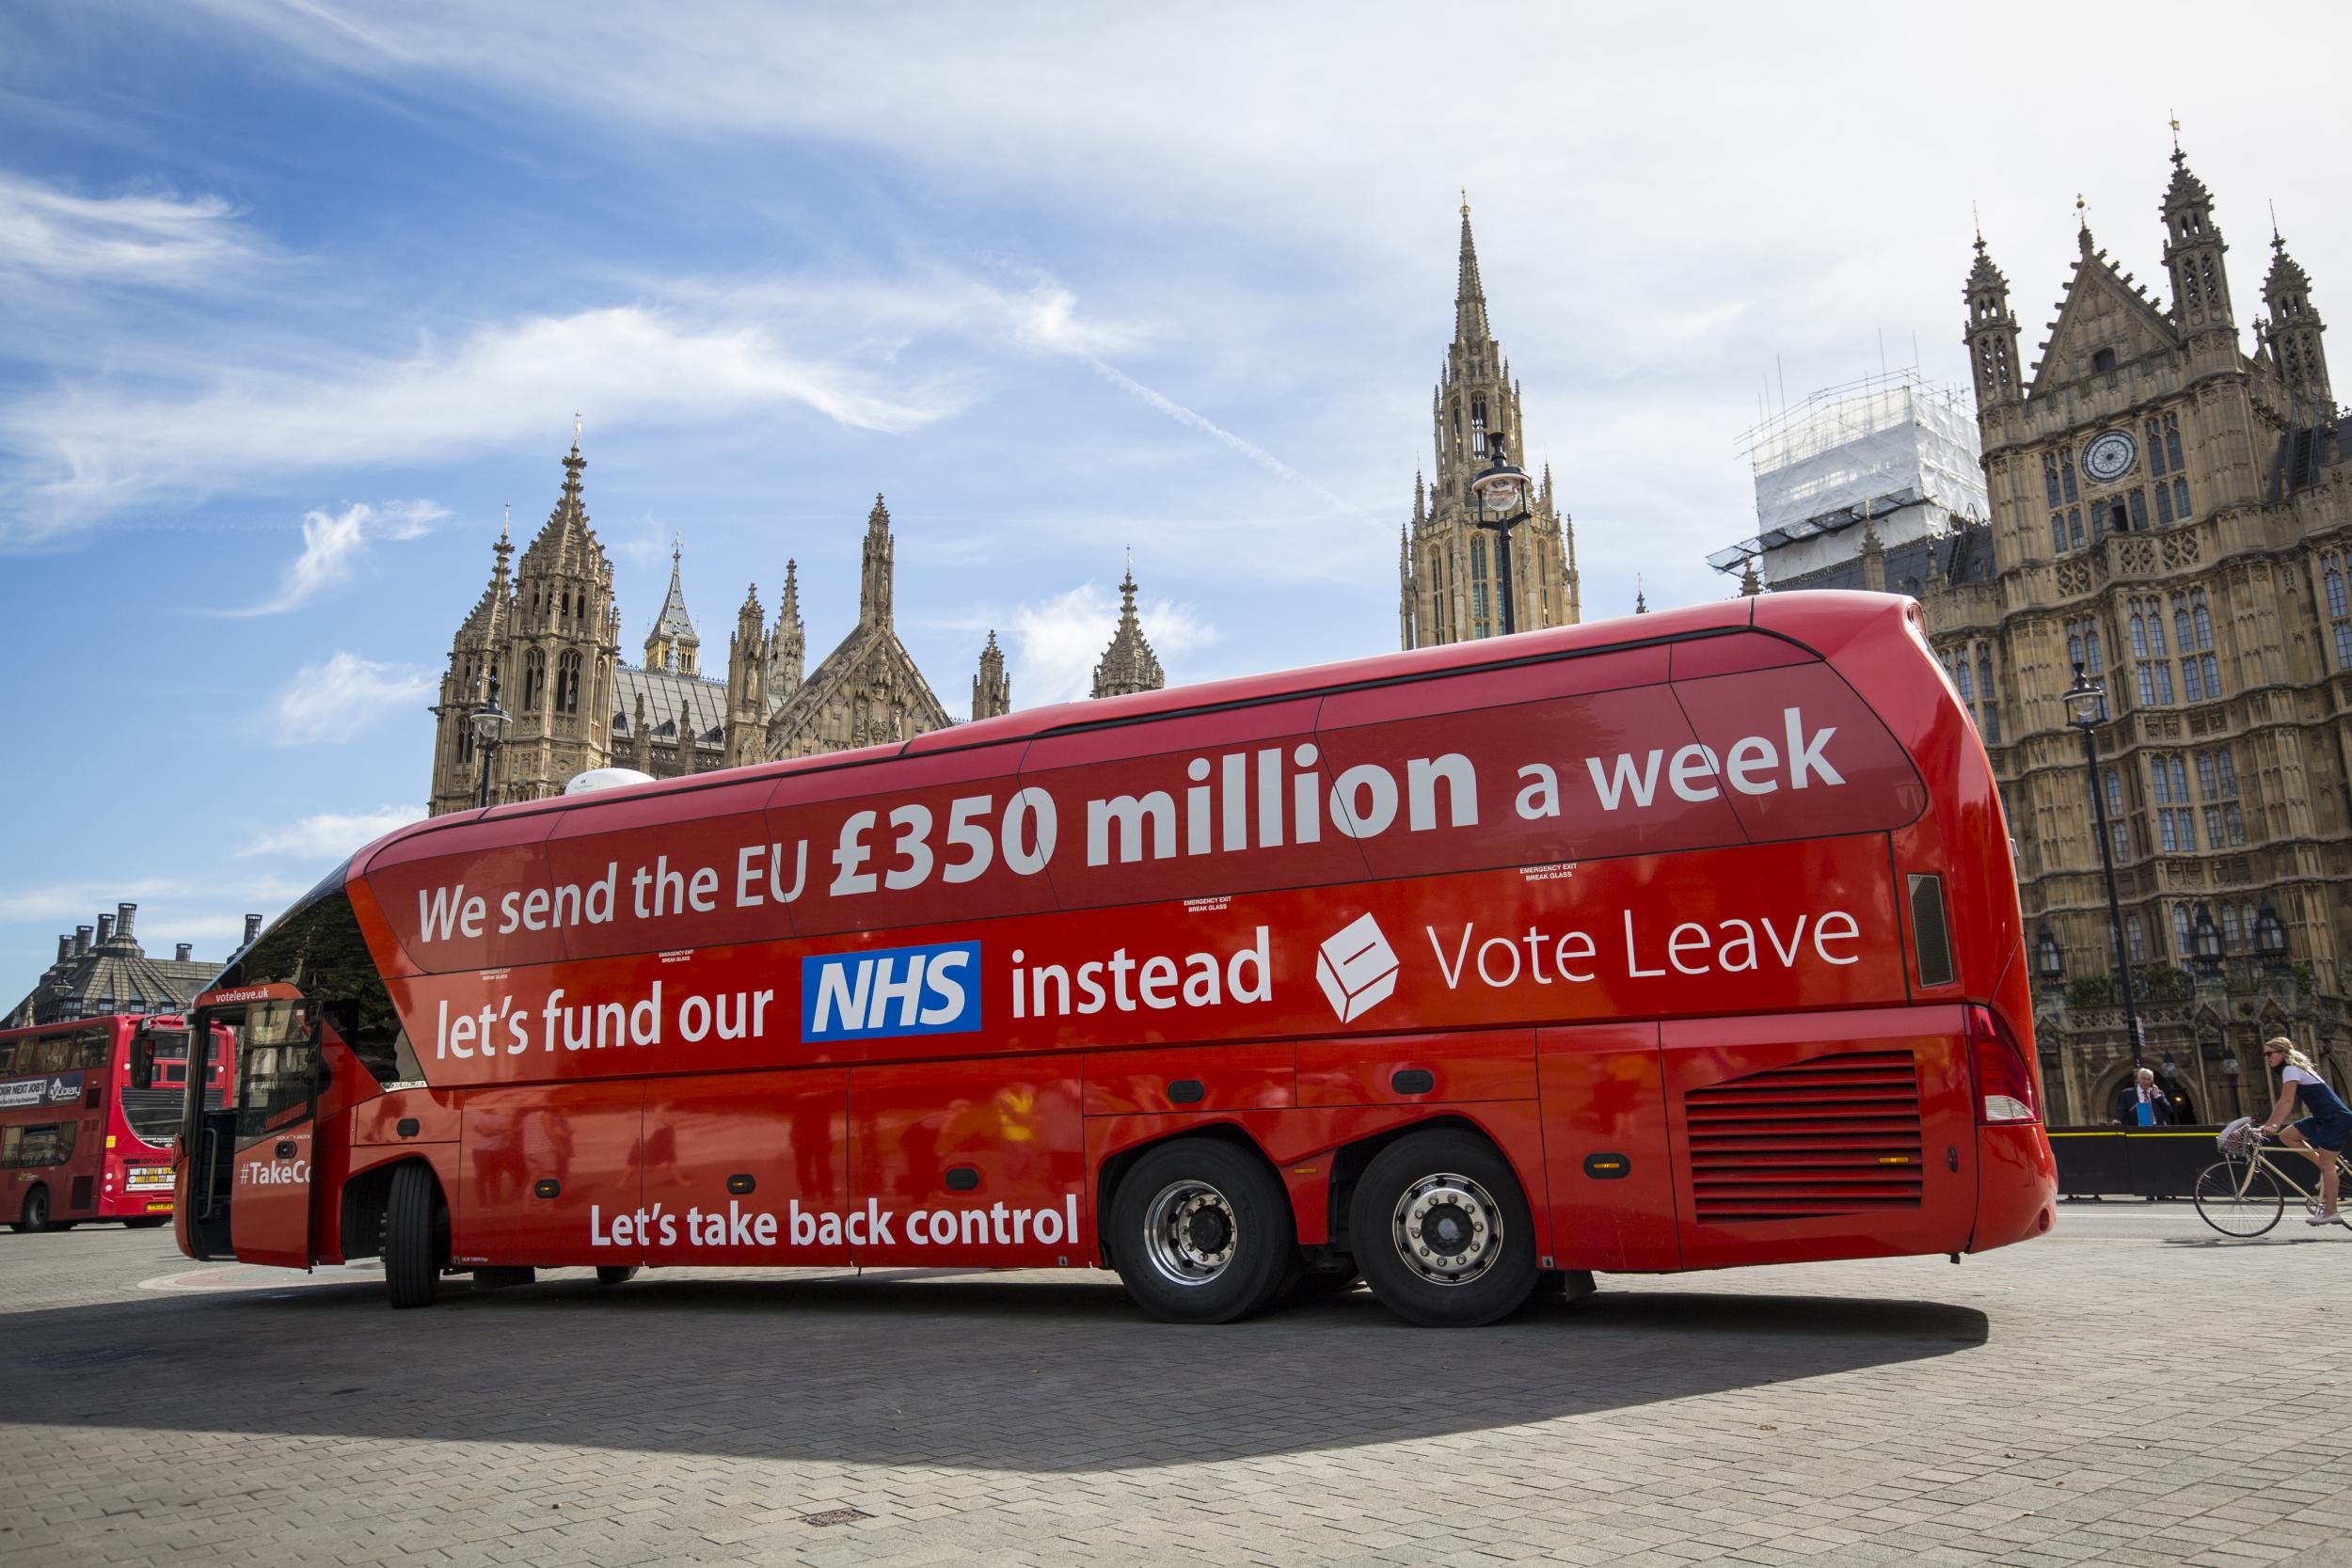 The investigation will look at whether Vote Leave exceeded its spending limit in the referendum